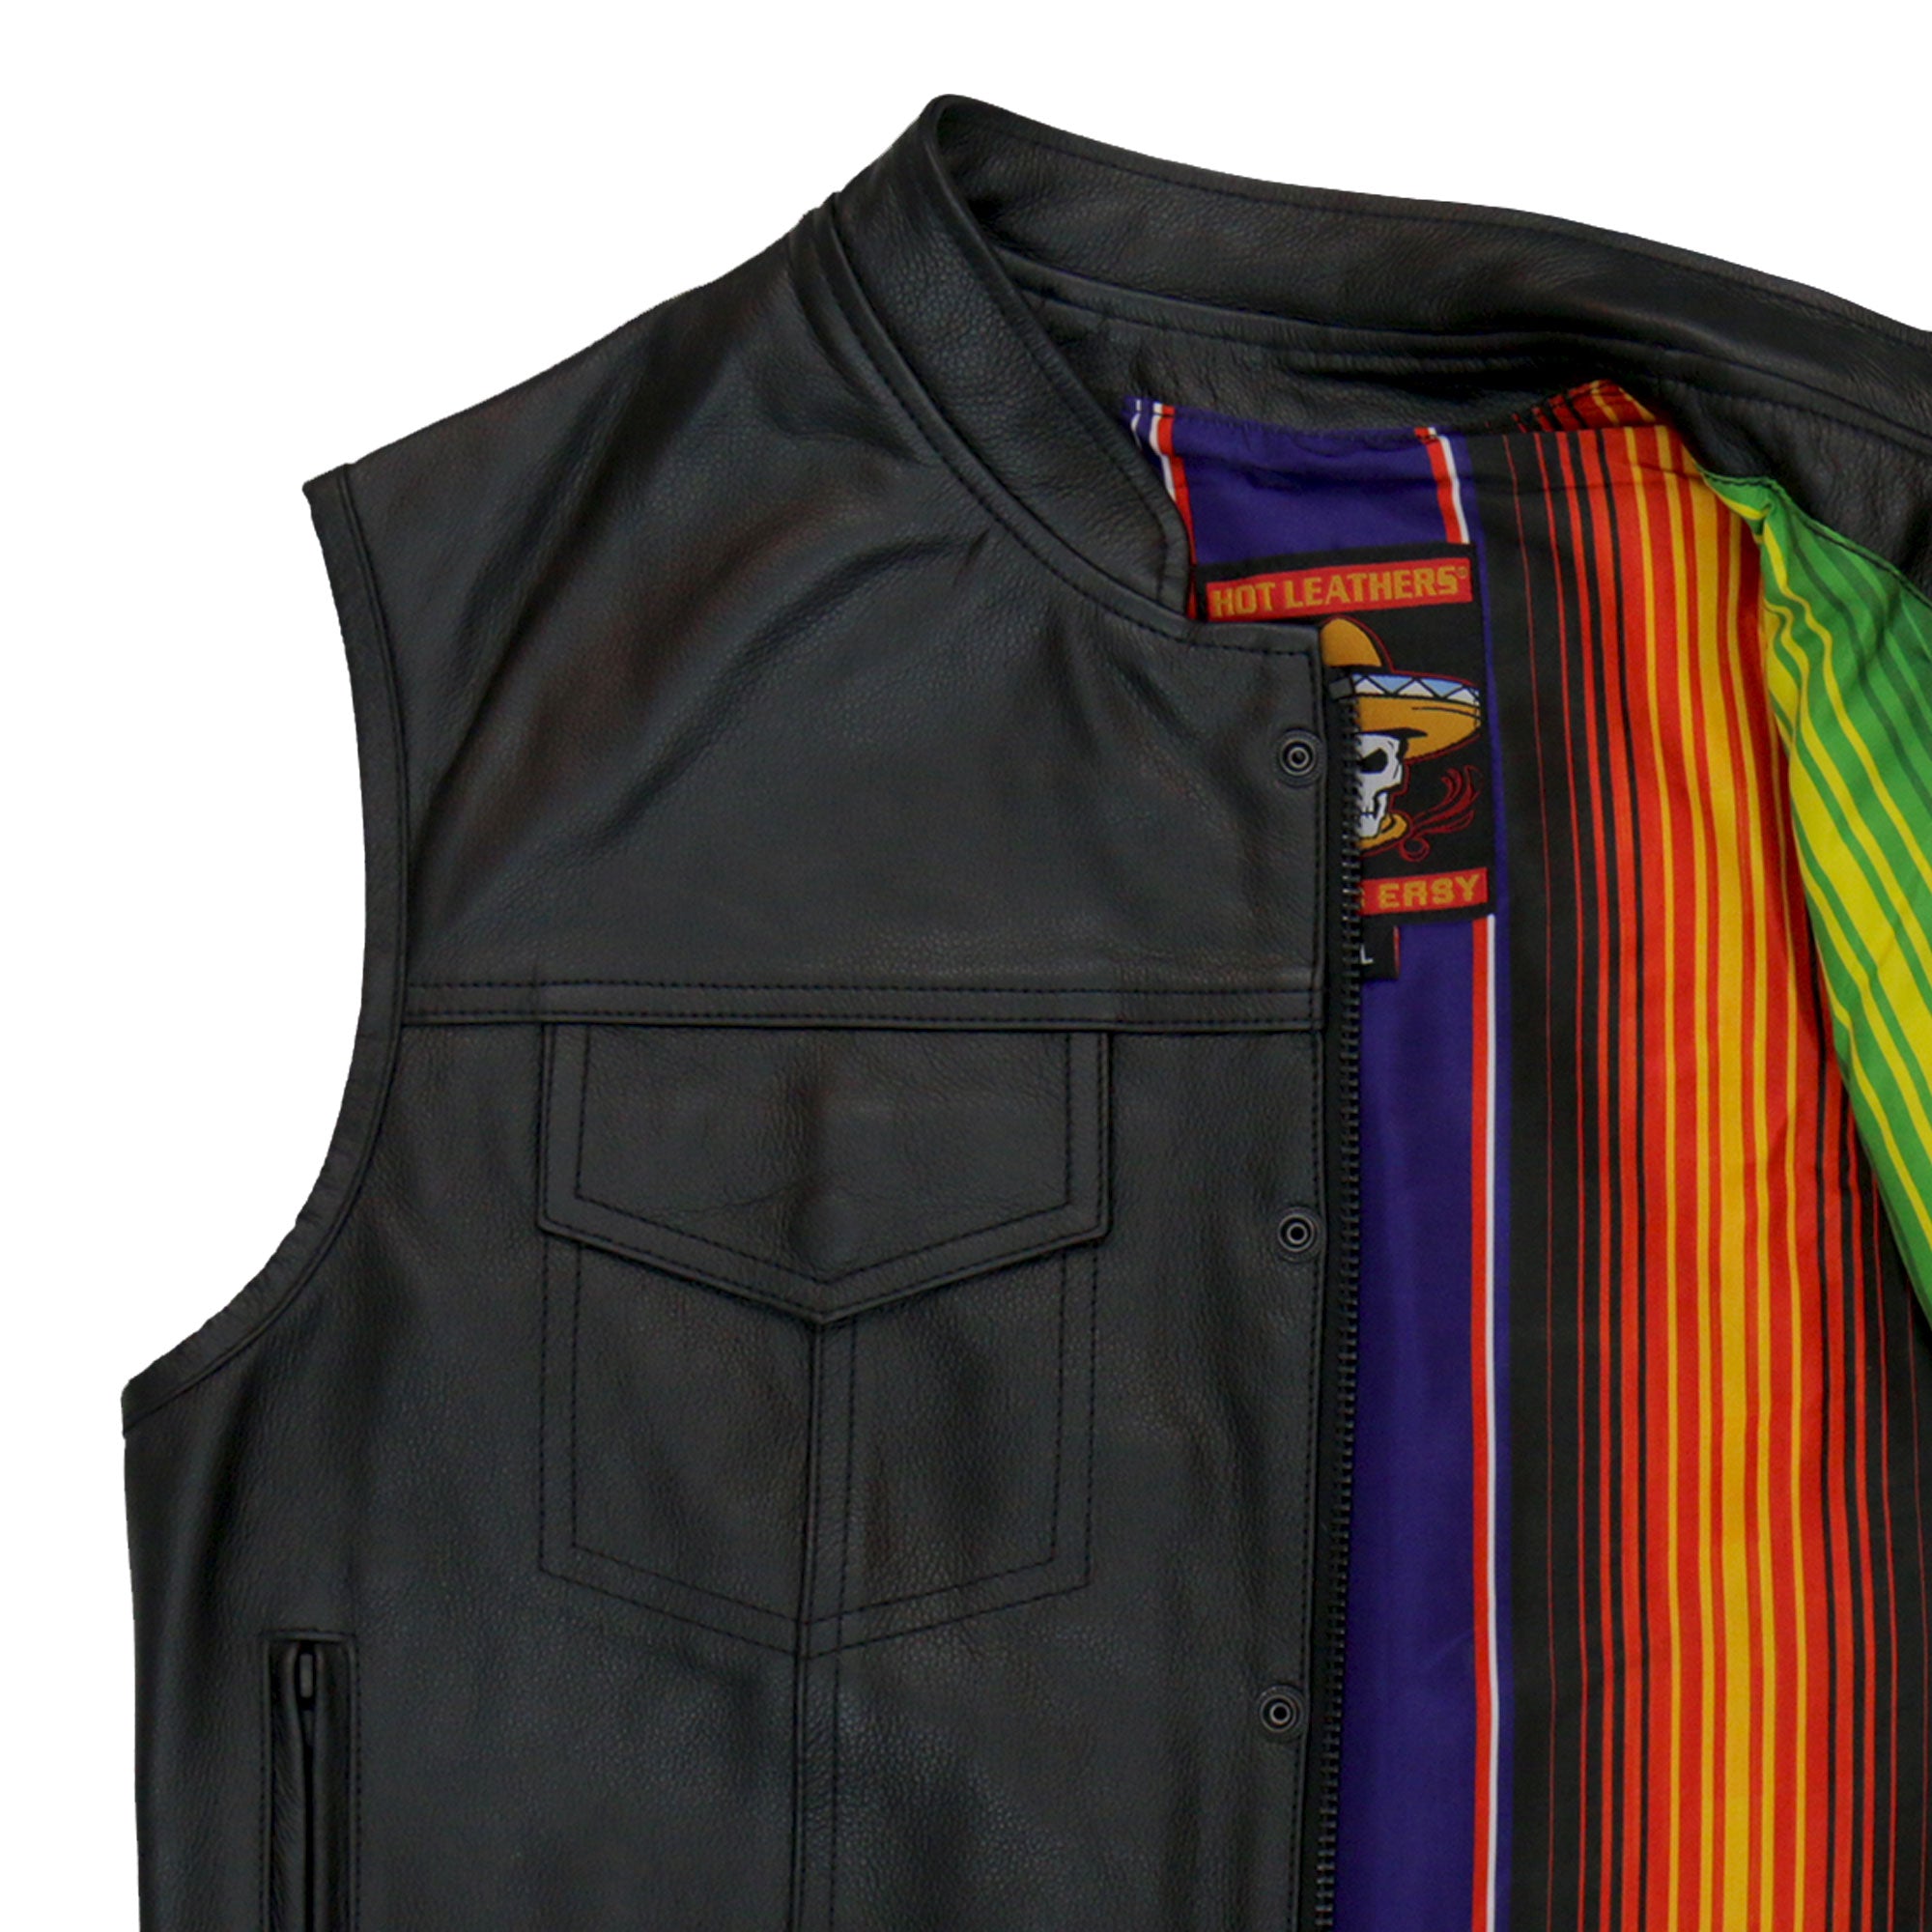 Hot Leathers VSM1057 Men’s Black 'Mexican Blanket' Motorcycle Club Style Conceal and Carry Leather Biker Vest